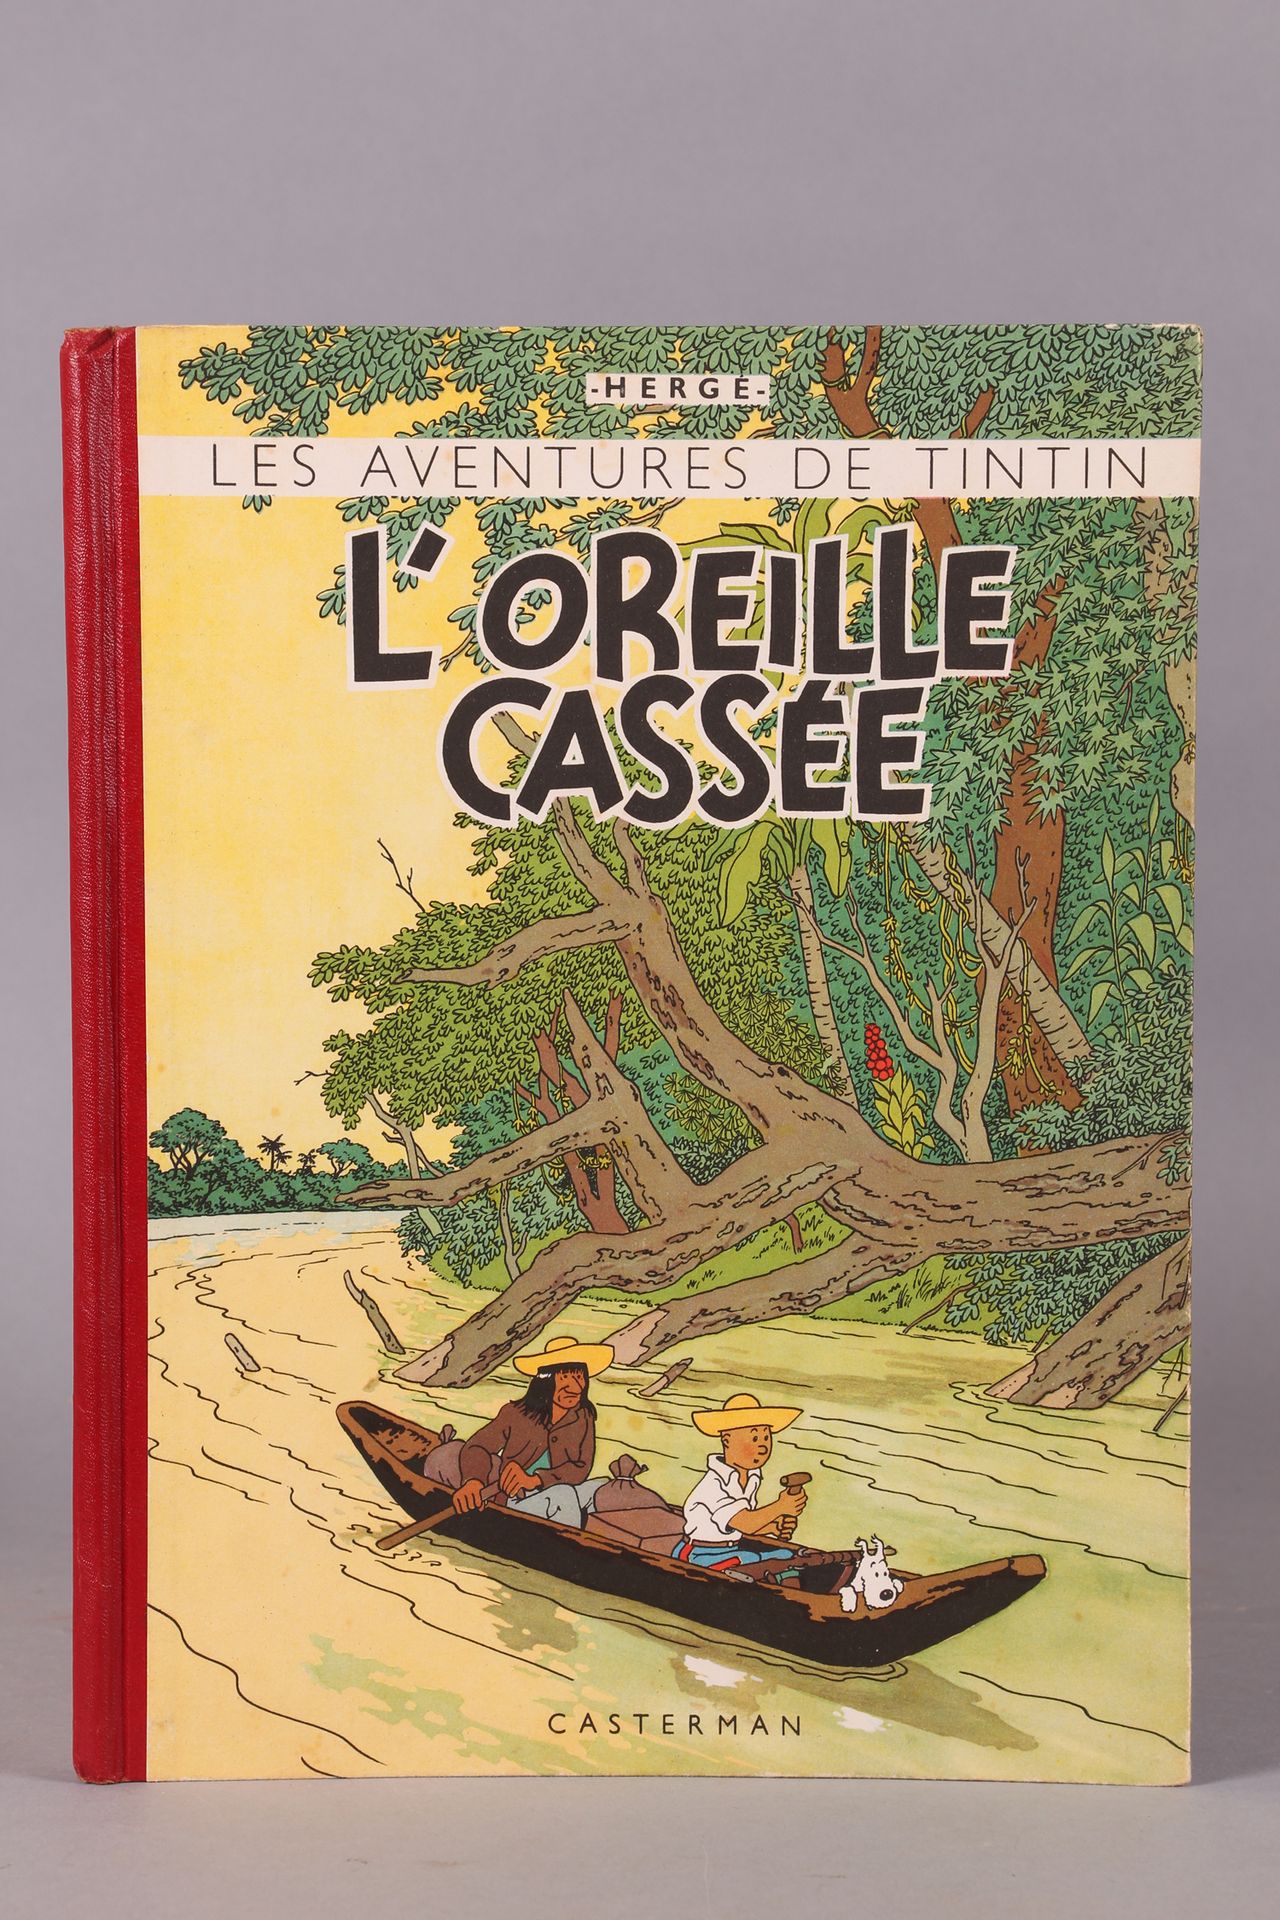 [TINTIN]. HERGE. "L'oreille cassée" Casterman, 1943. First color edition. Red sp&hellip;